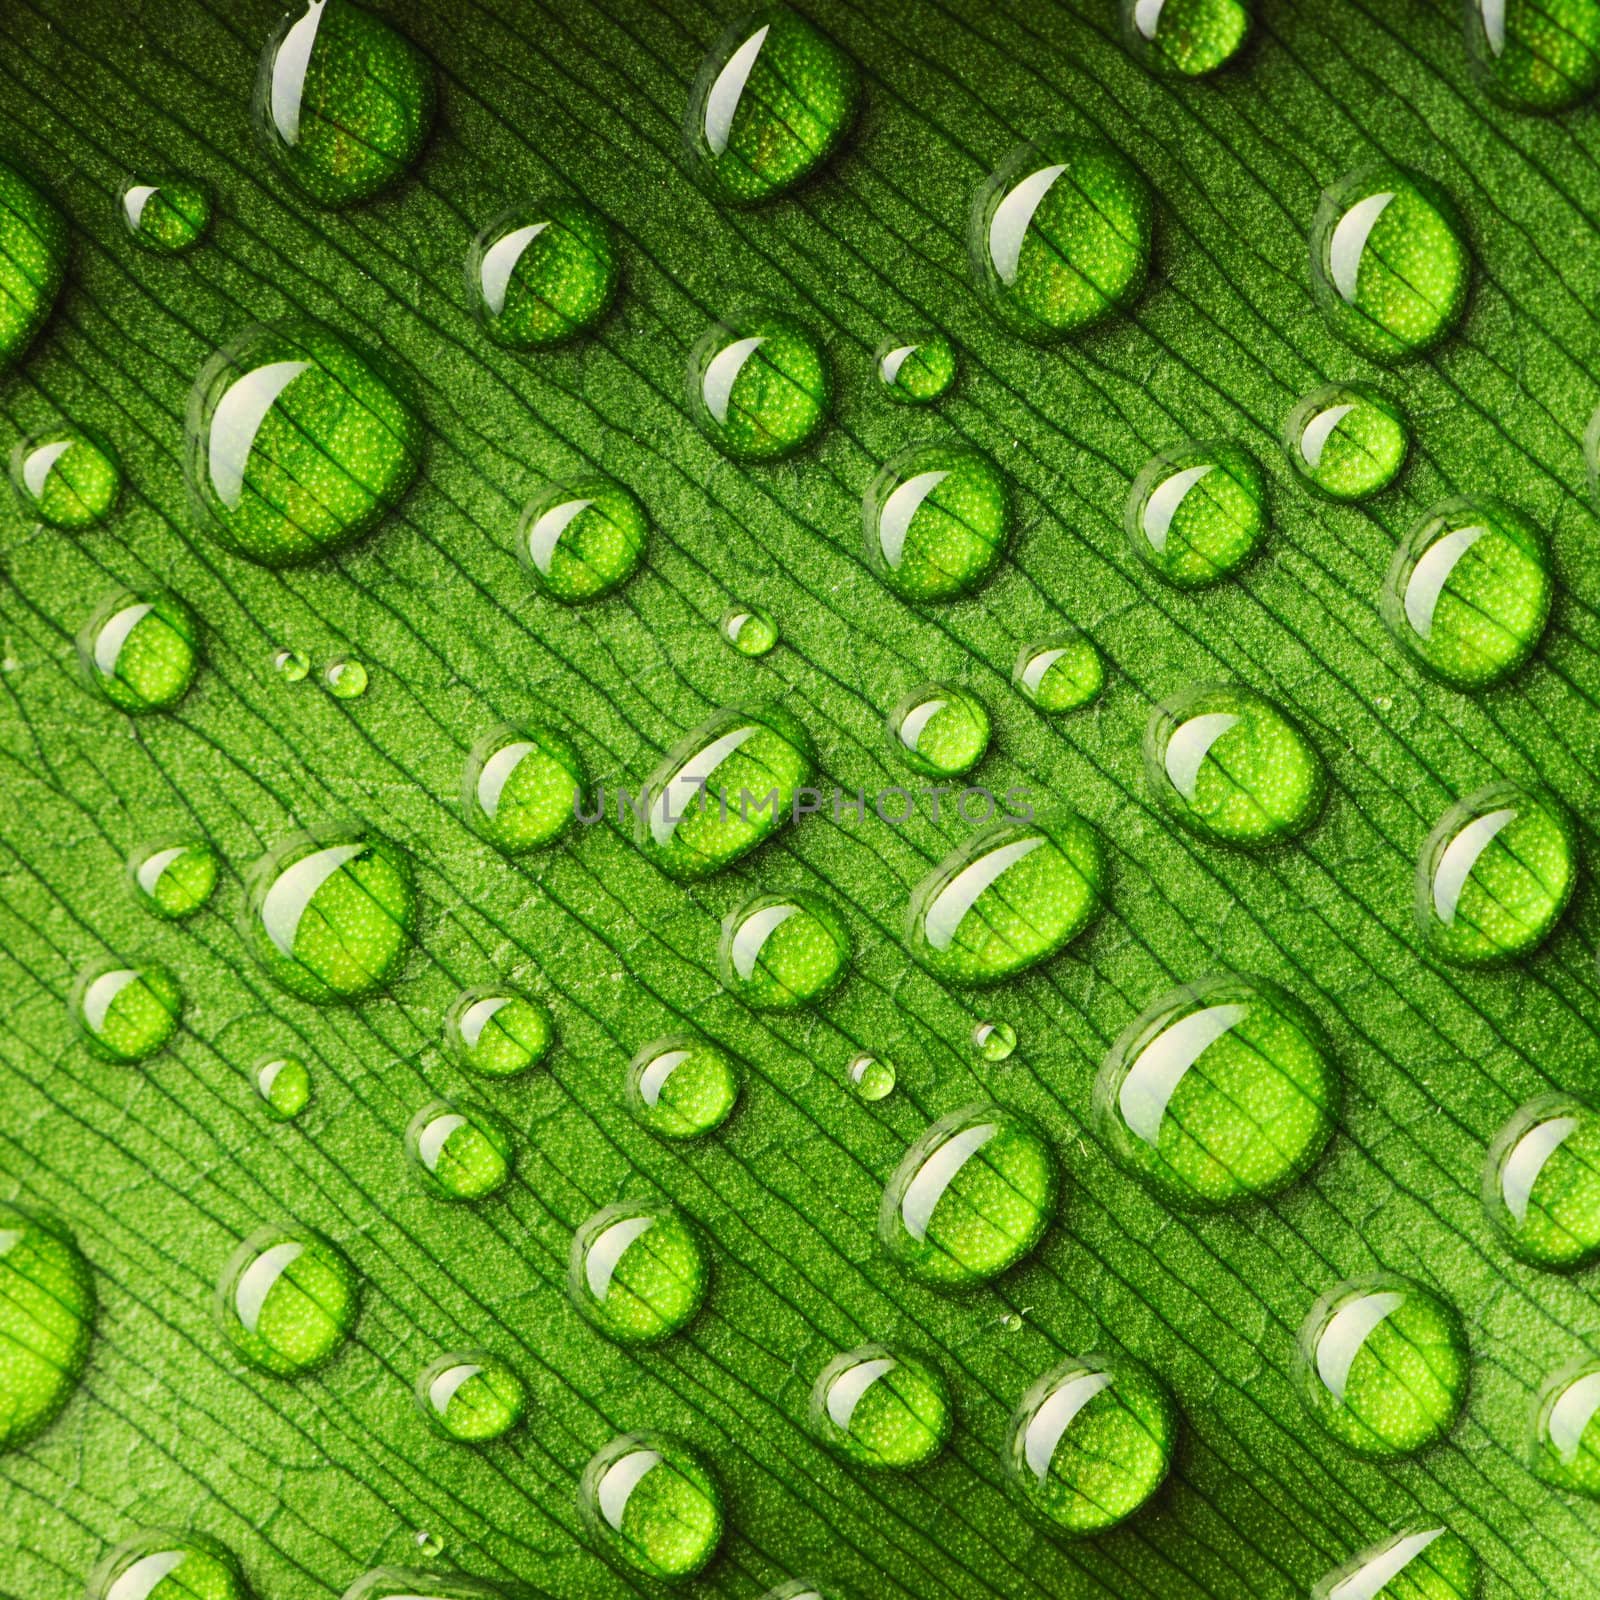 Water drops on leaf by haveseen